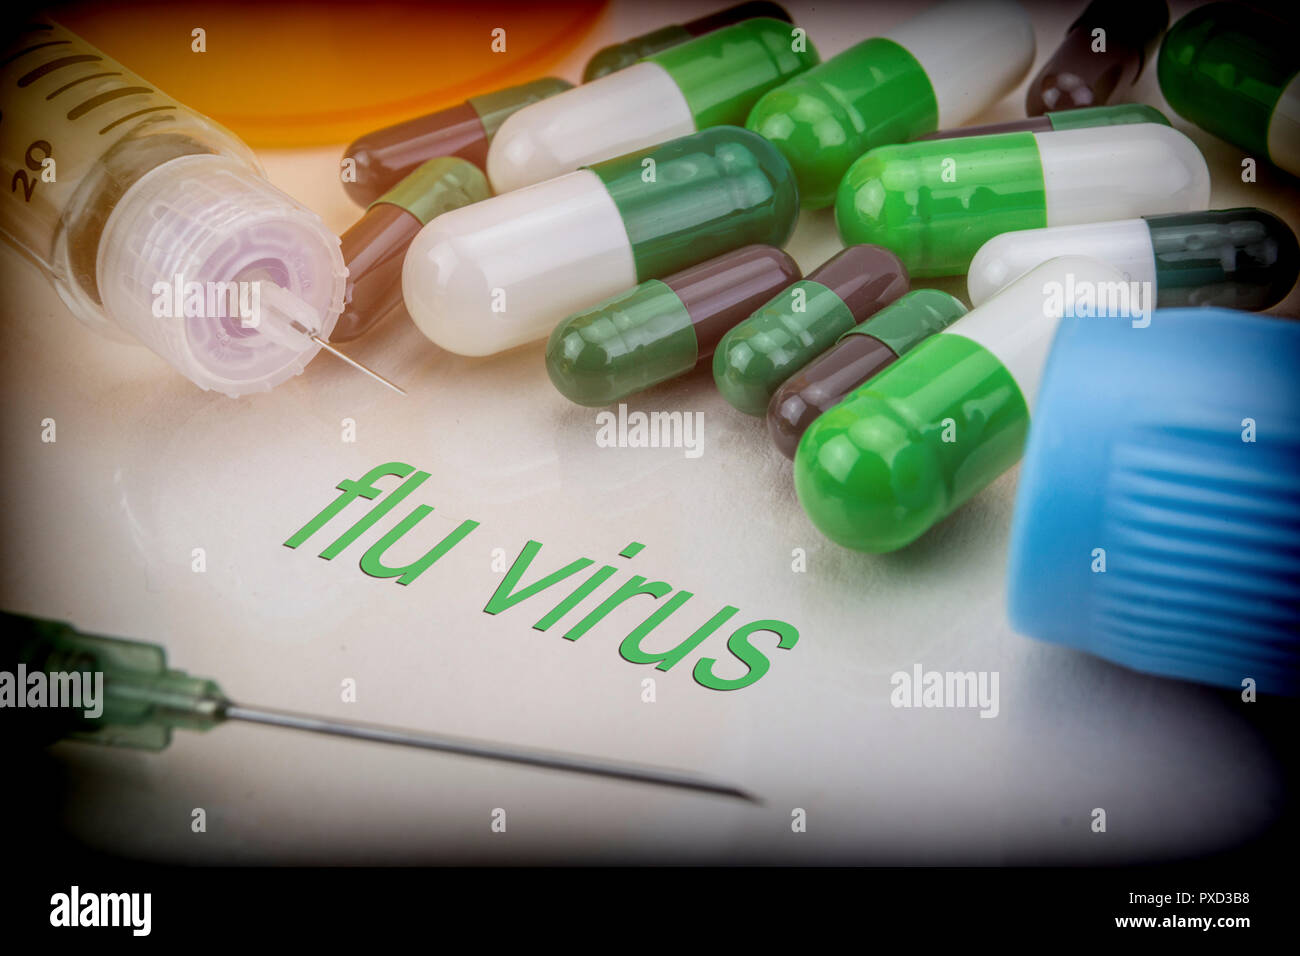 Flu virus, medicines and syringes as concept of ordinary treatment health Stock Photo